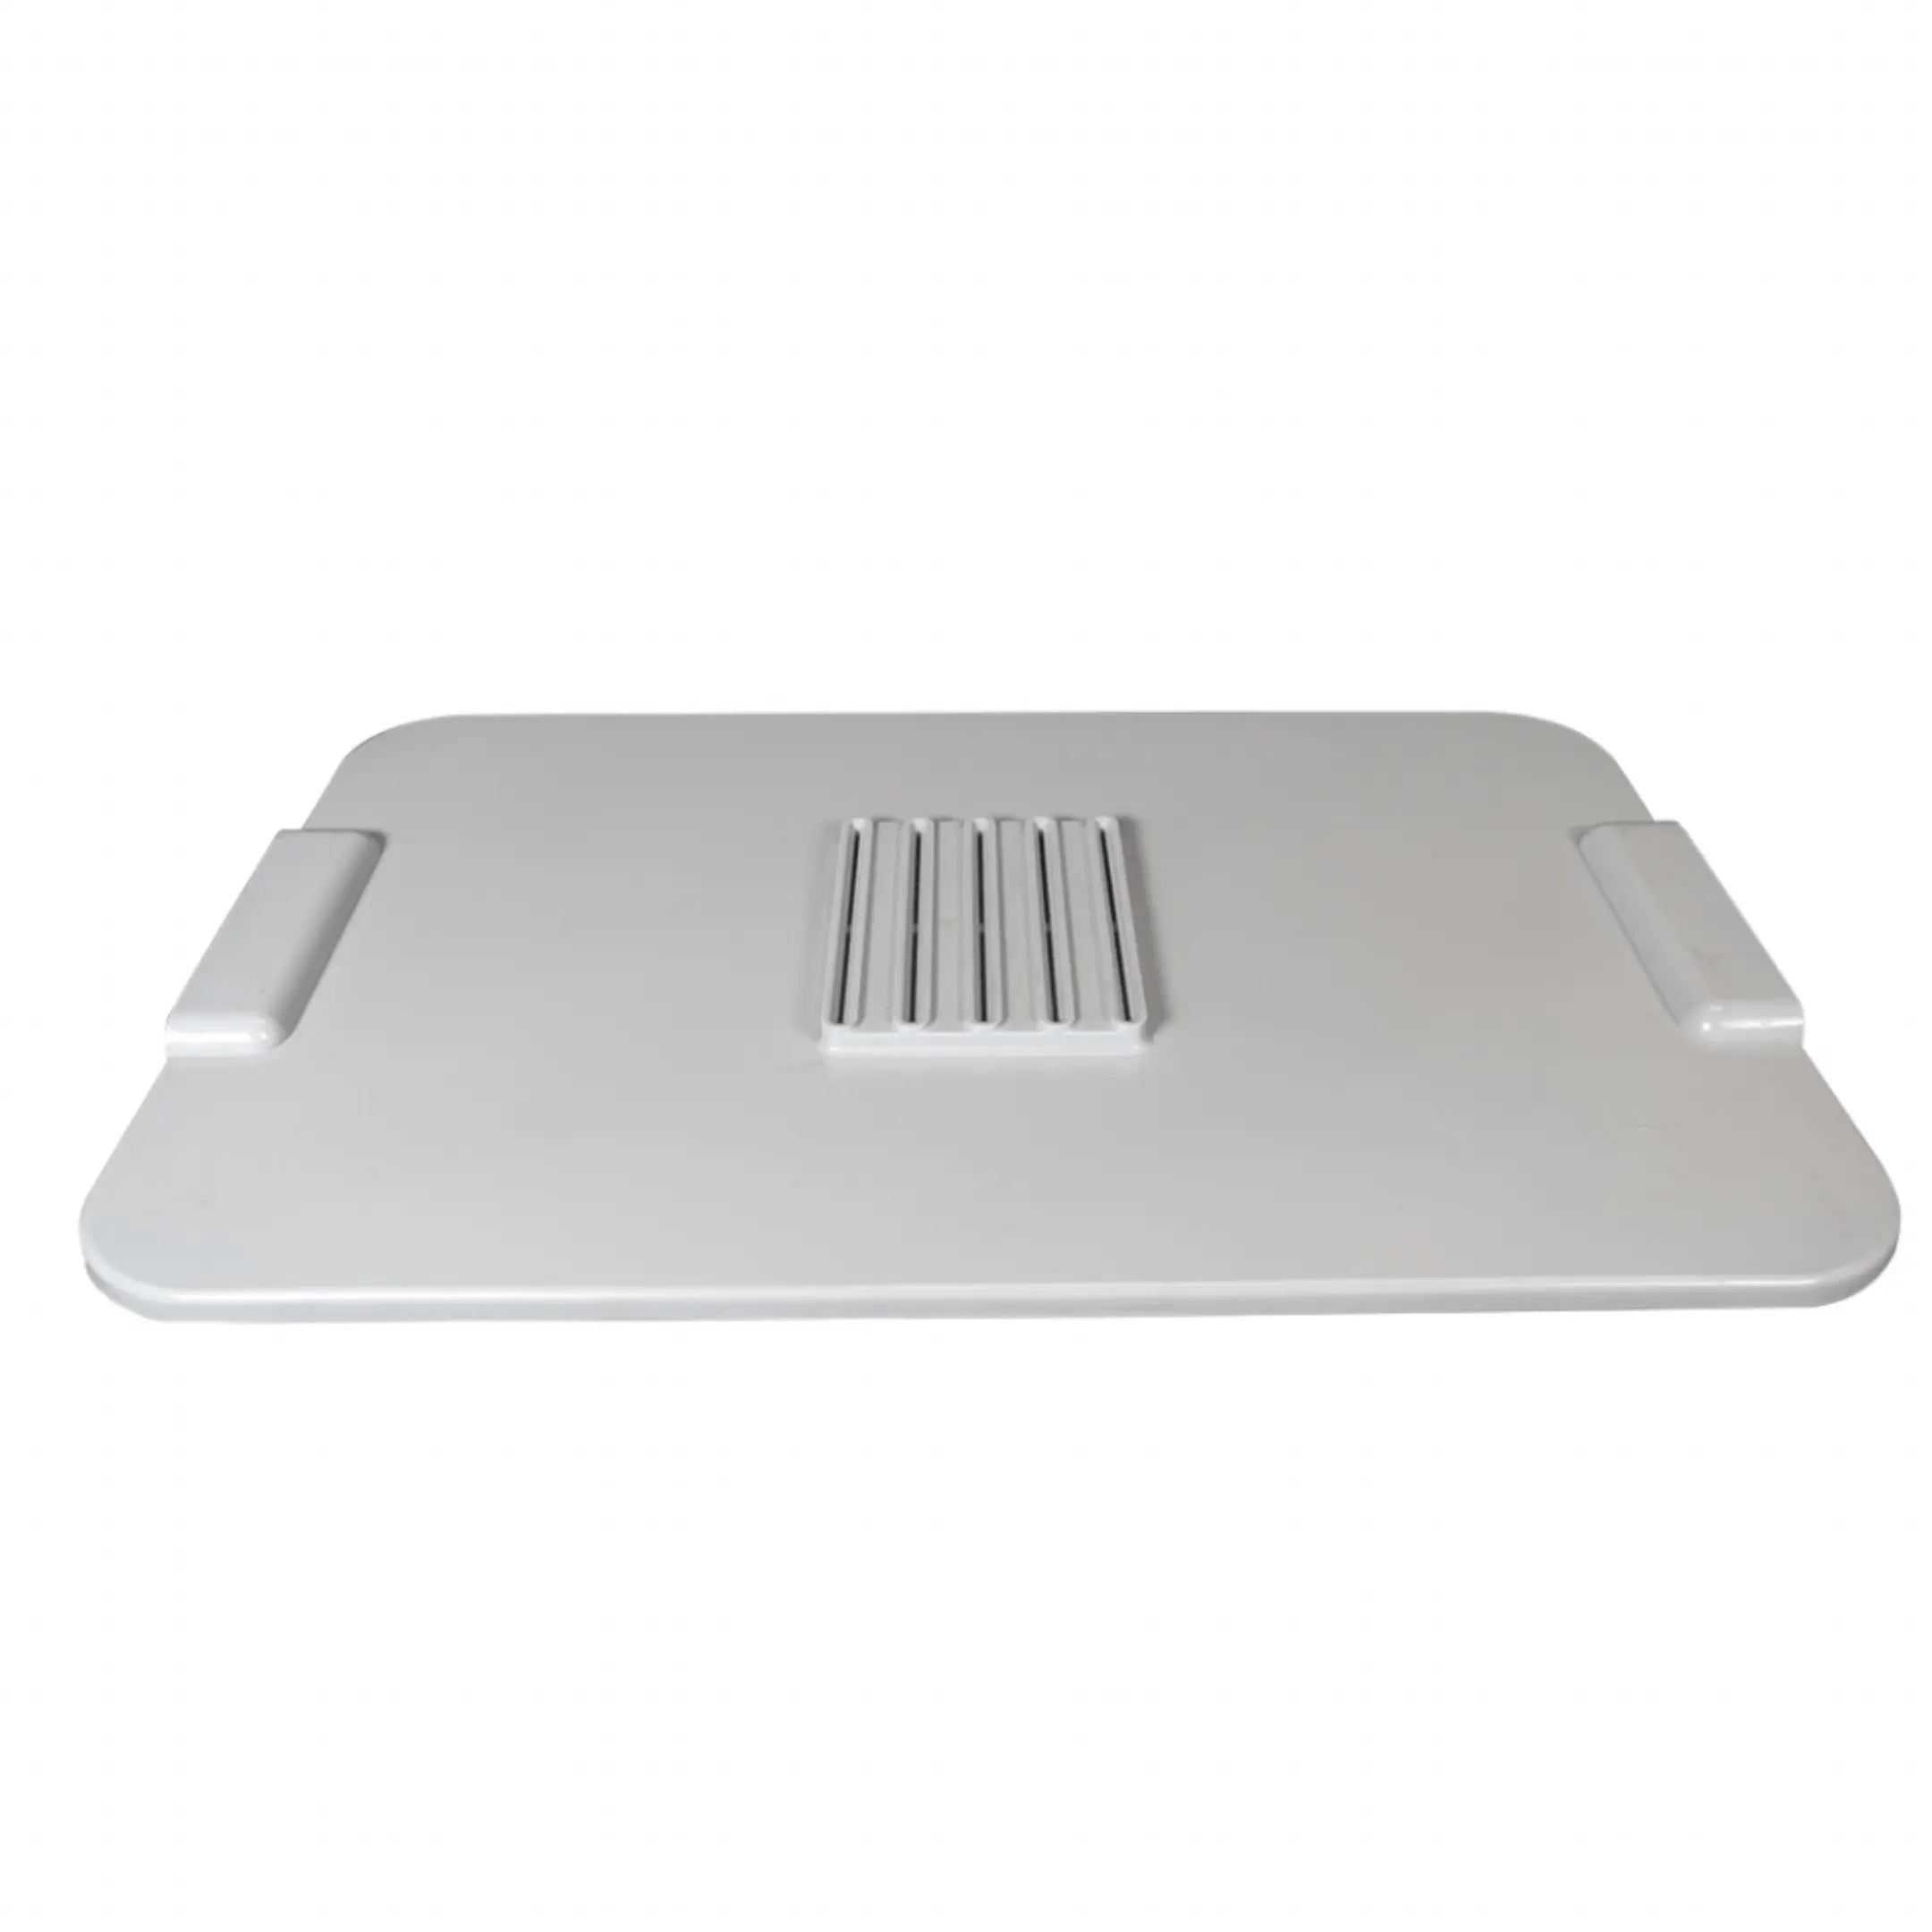 Grey Plastic Replacement Lid with vents for the FilterPro Dehydrator.